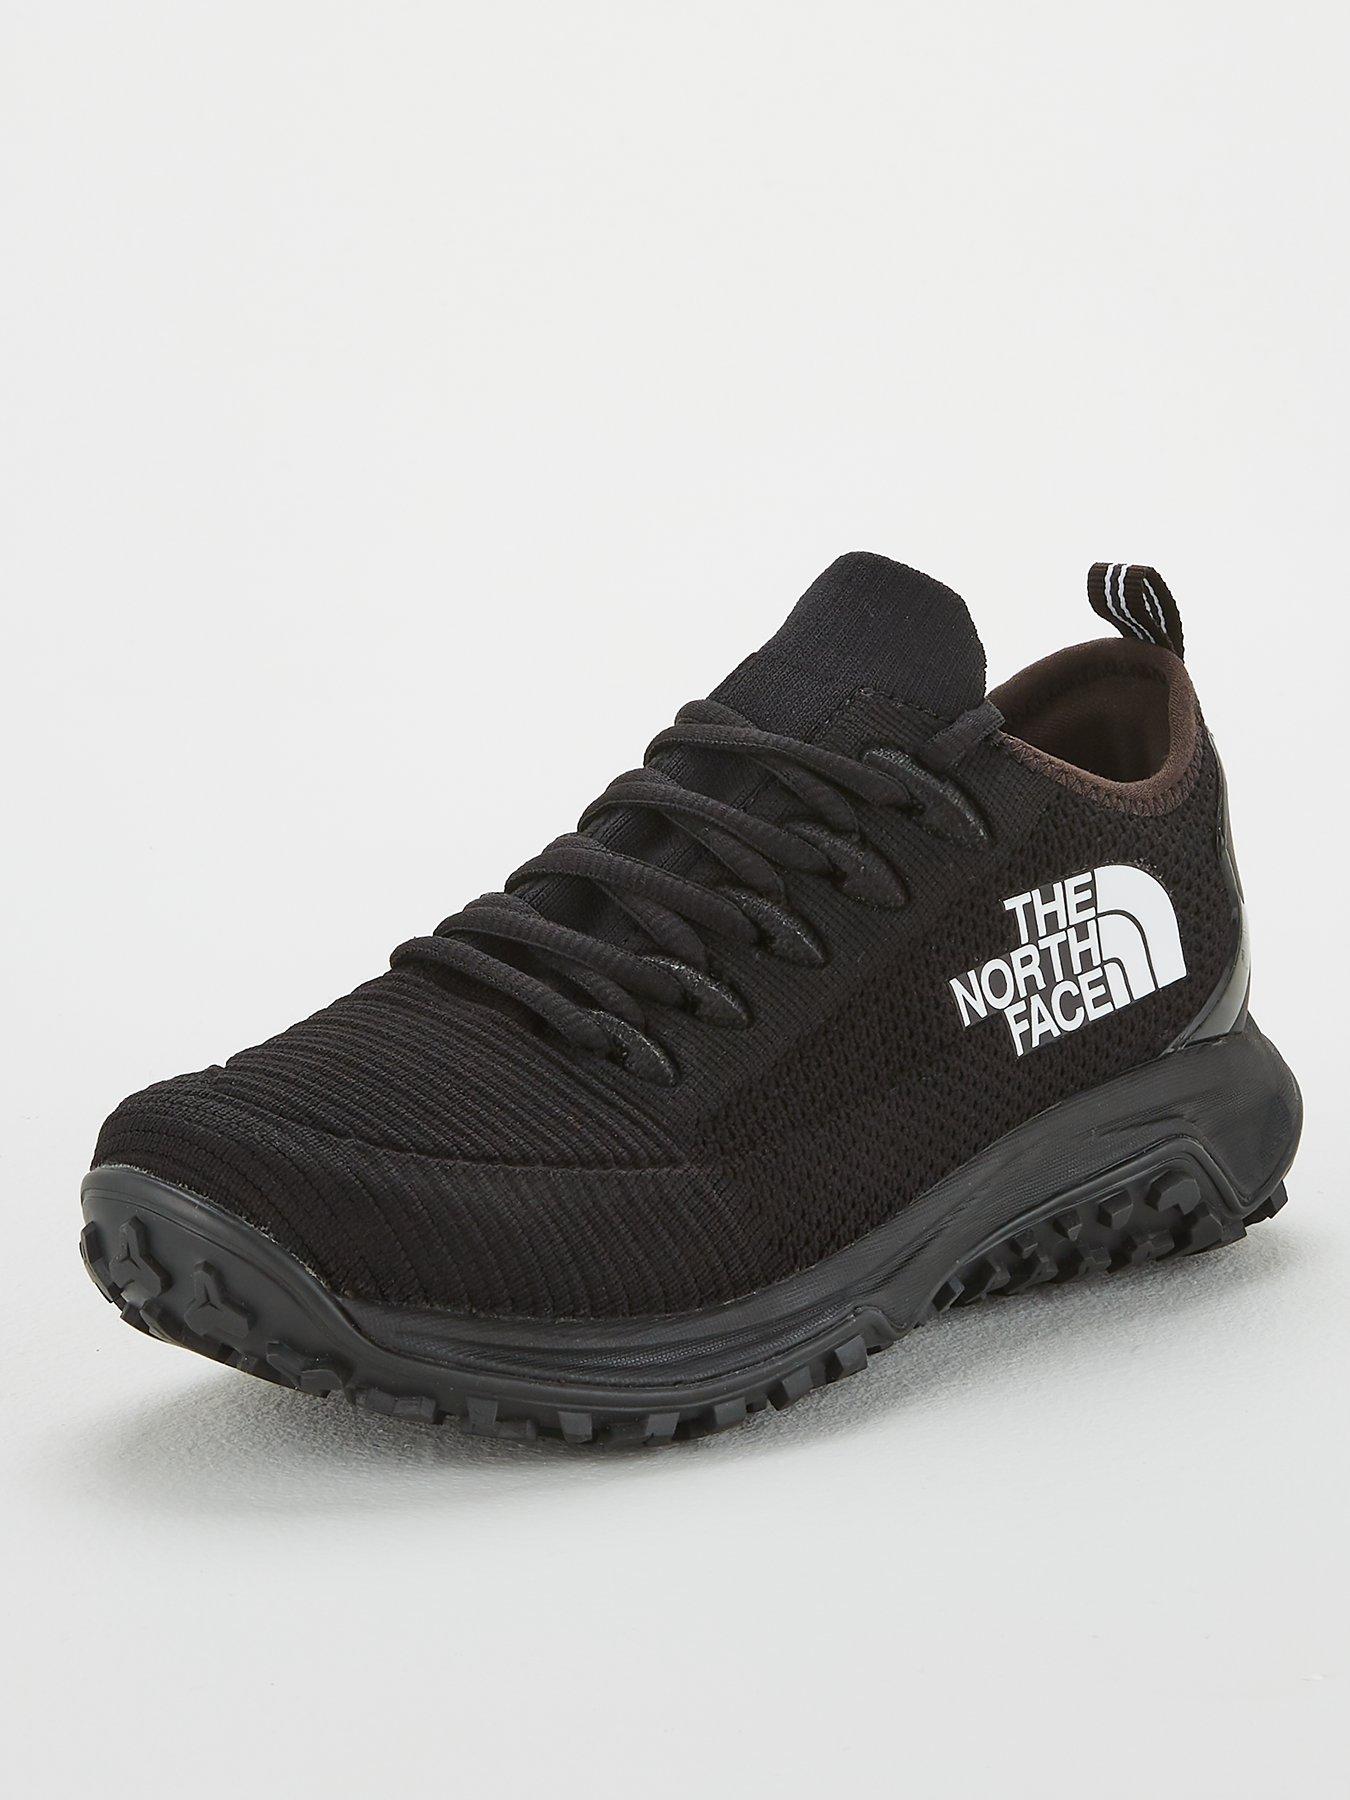 north face black trainers Cheaper Than 